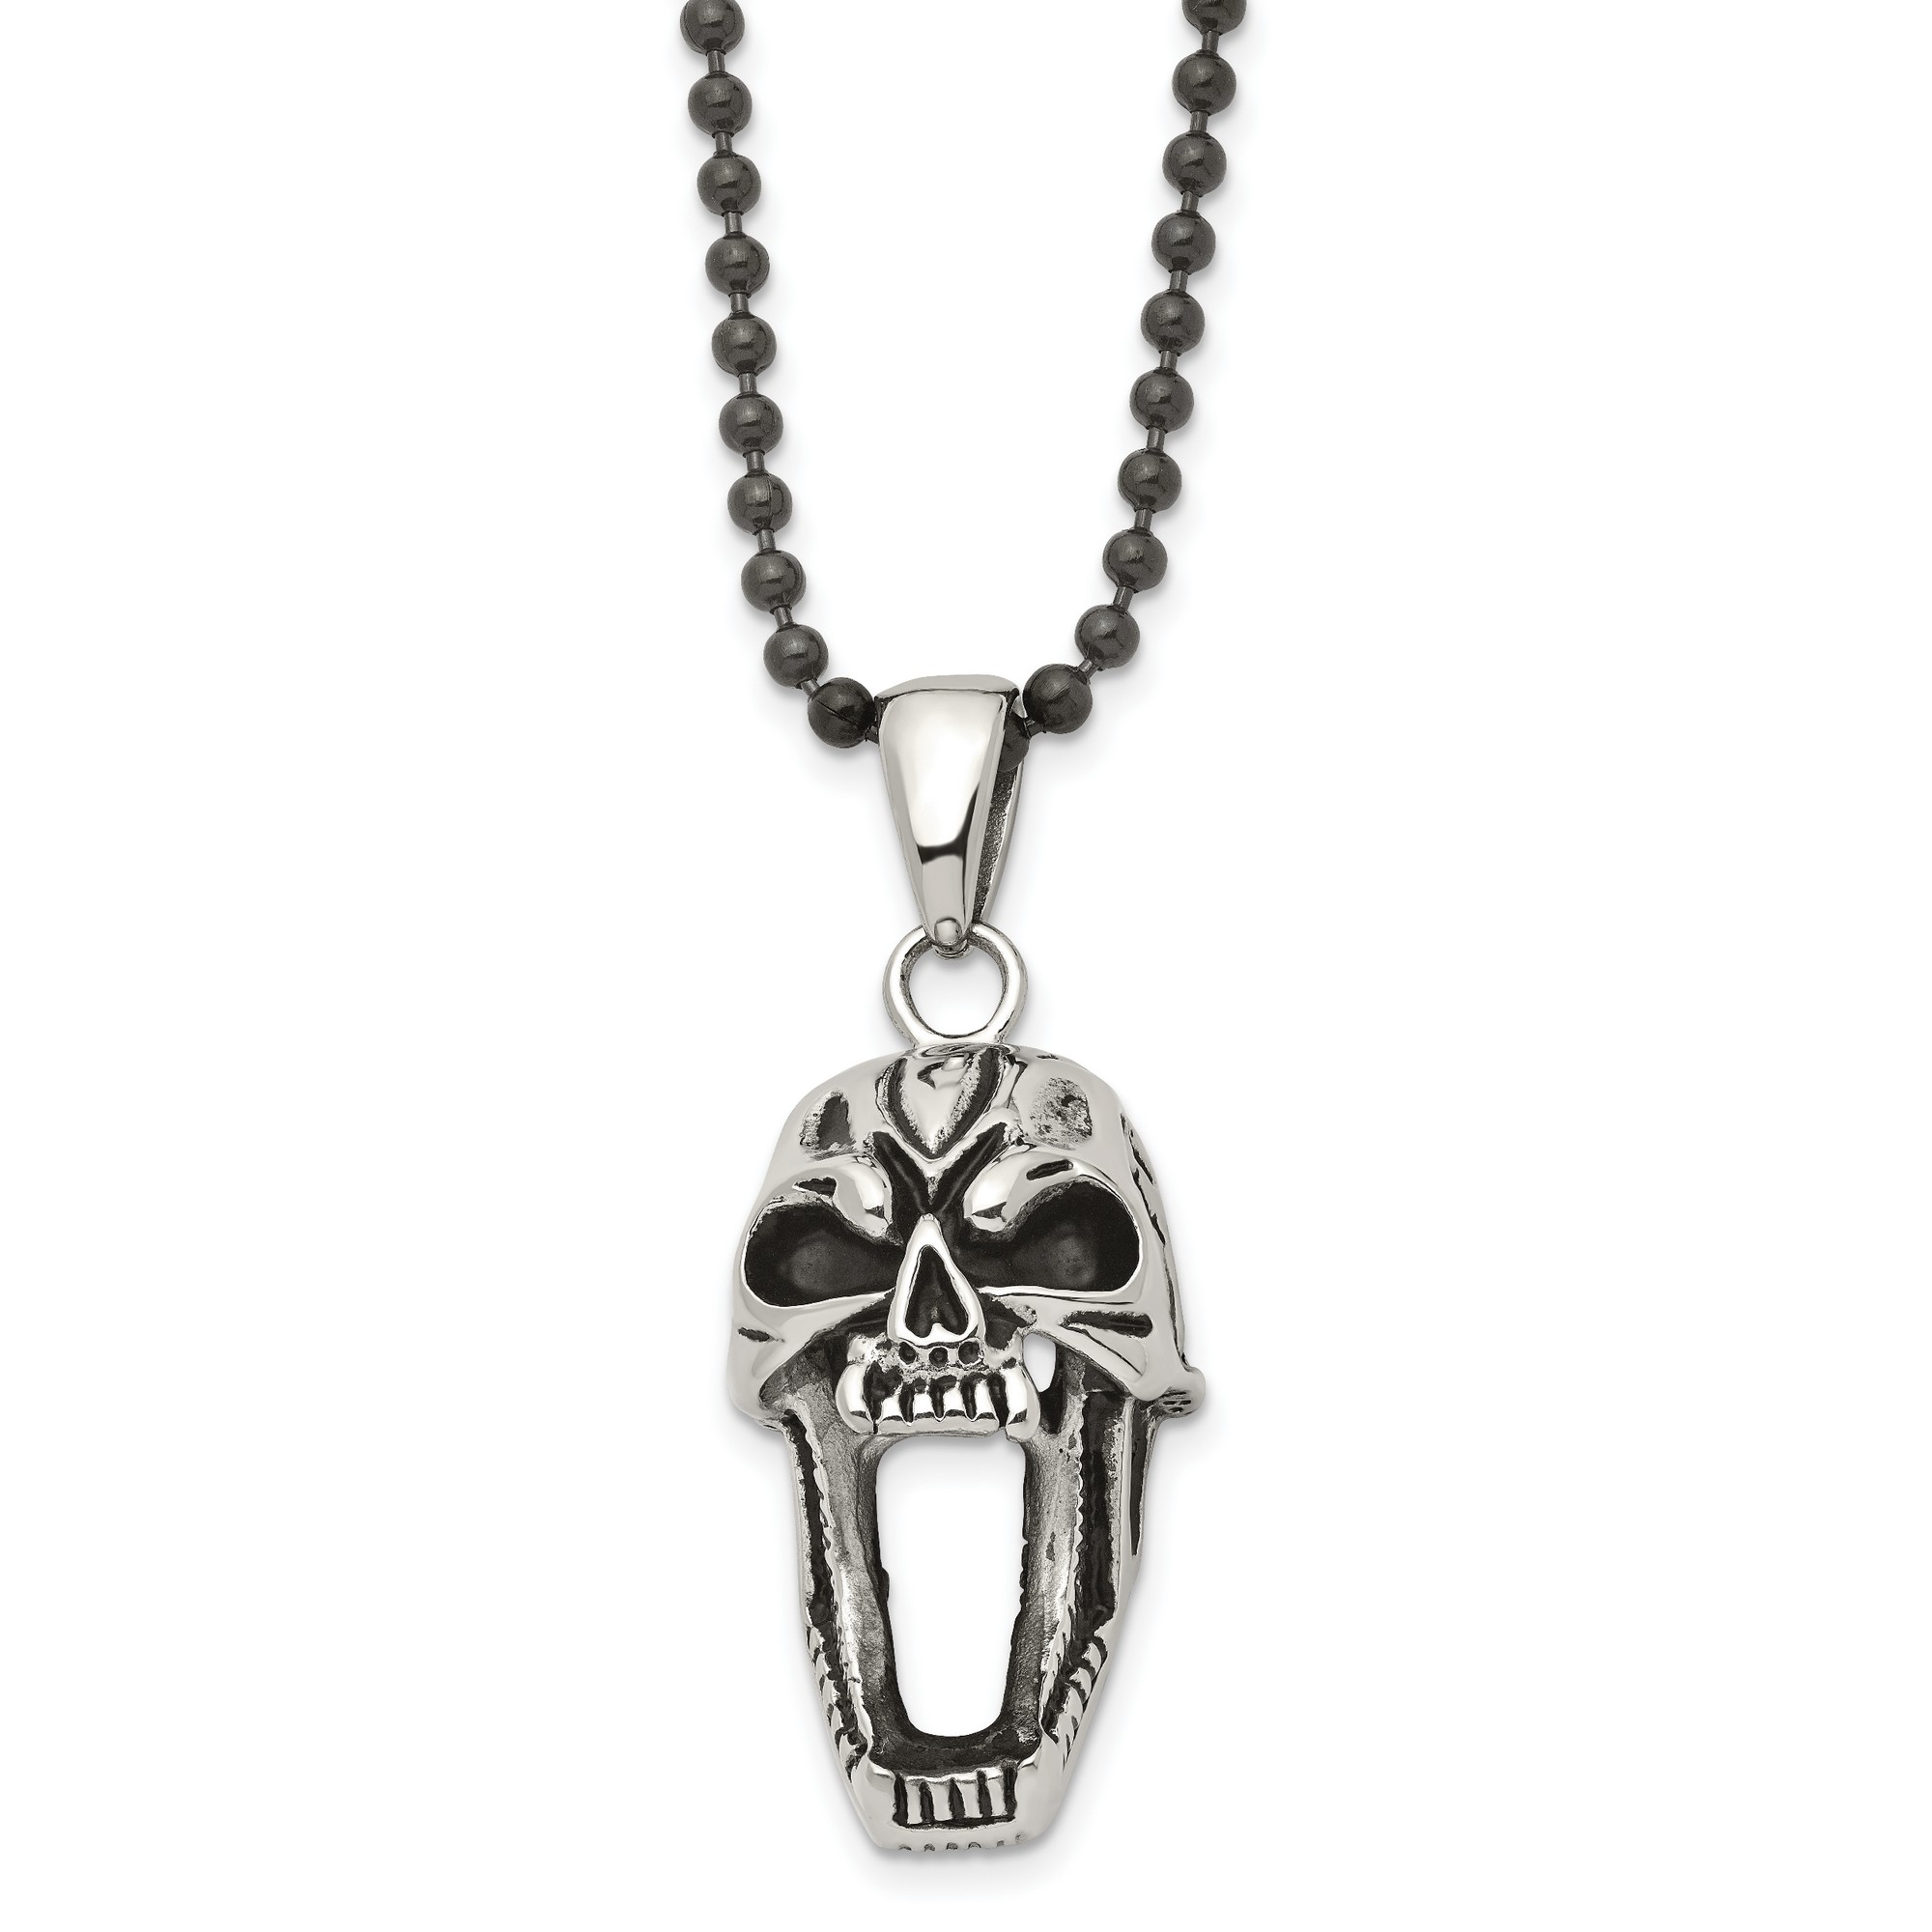 Stainless Steel Polished and Antiqued Skull Necklace